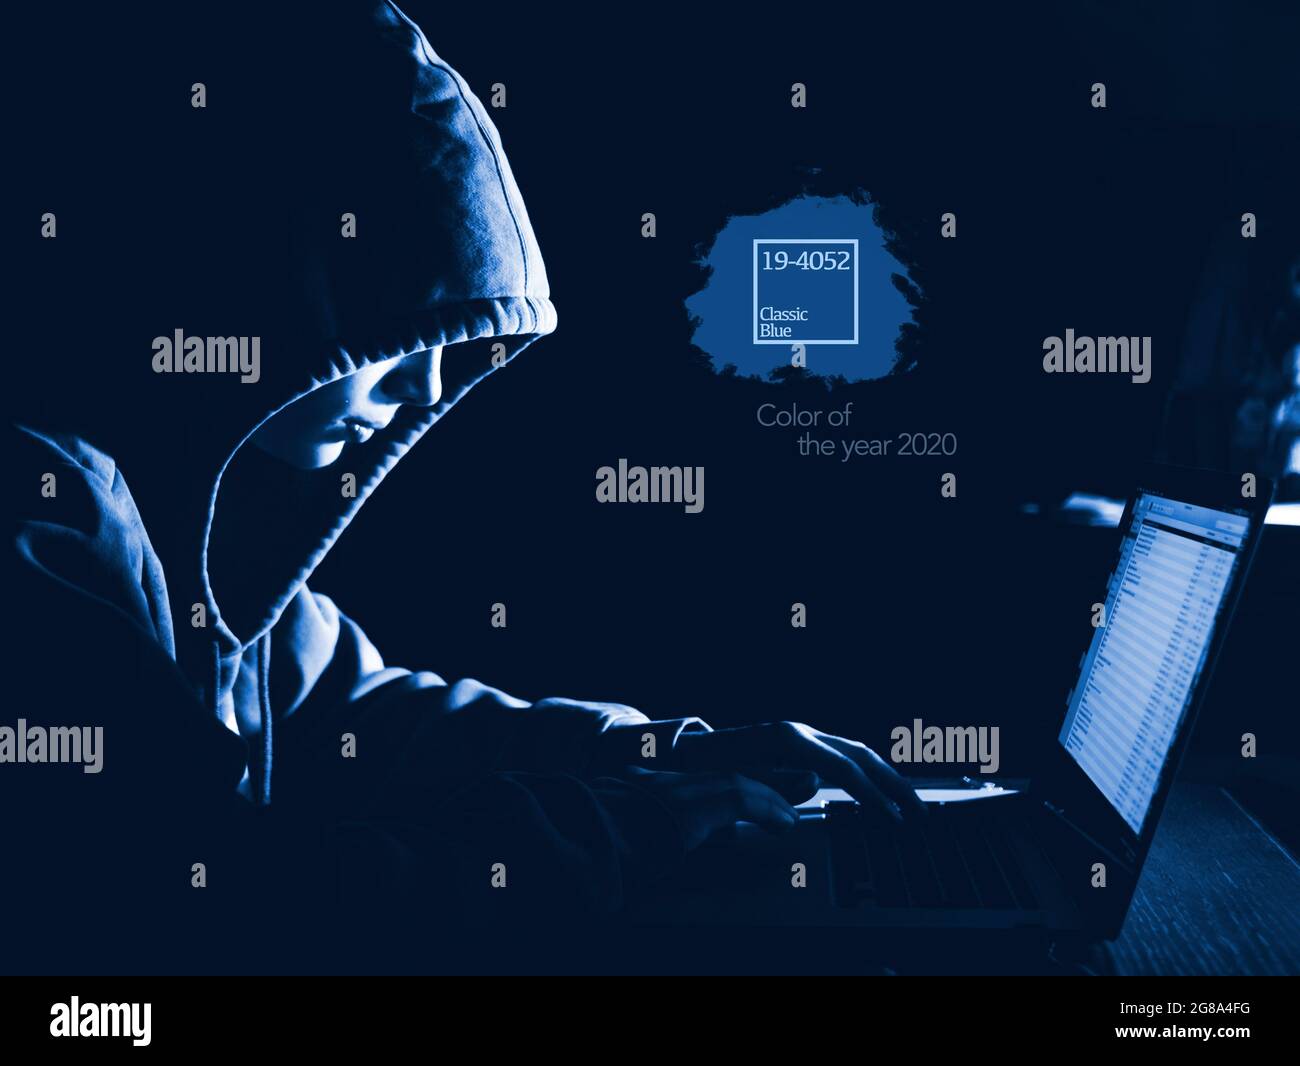 anonimous man in the hoodie in dark studio typing text online , color of the 2020 year trend, classic blue tones Stock Photo